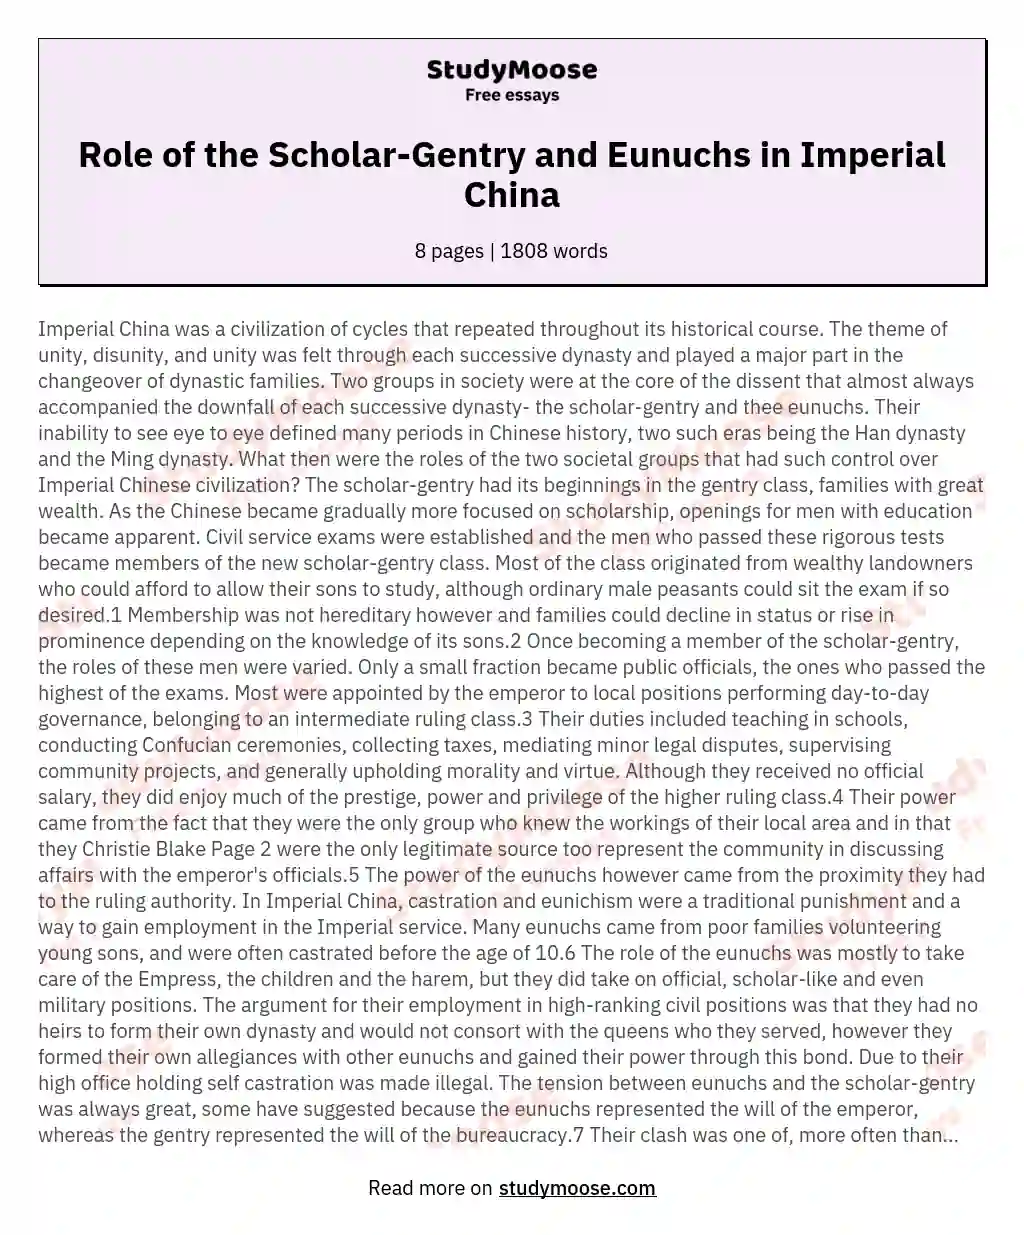 Roles of Scholar-Gentry and Eunuchs in Imperial China essay